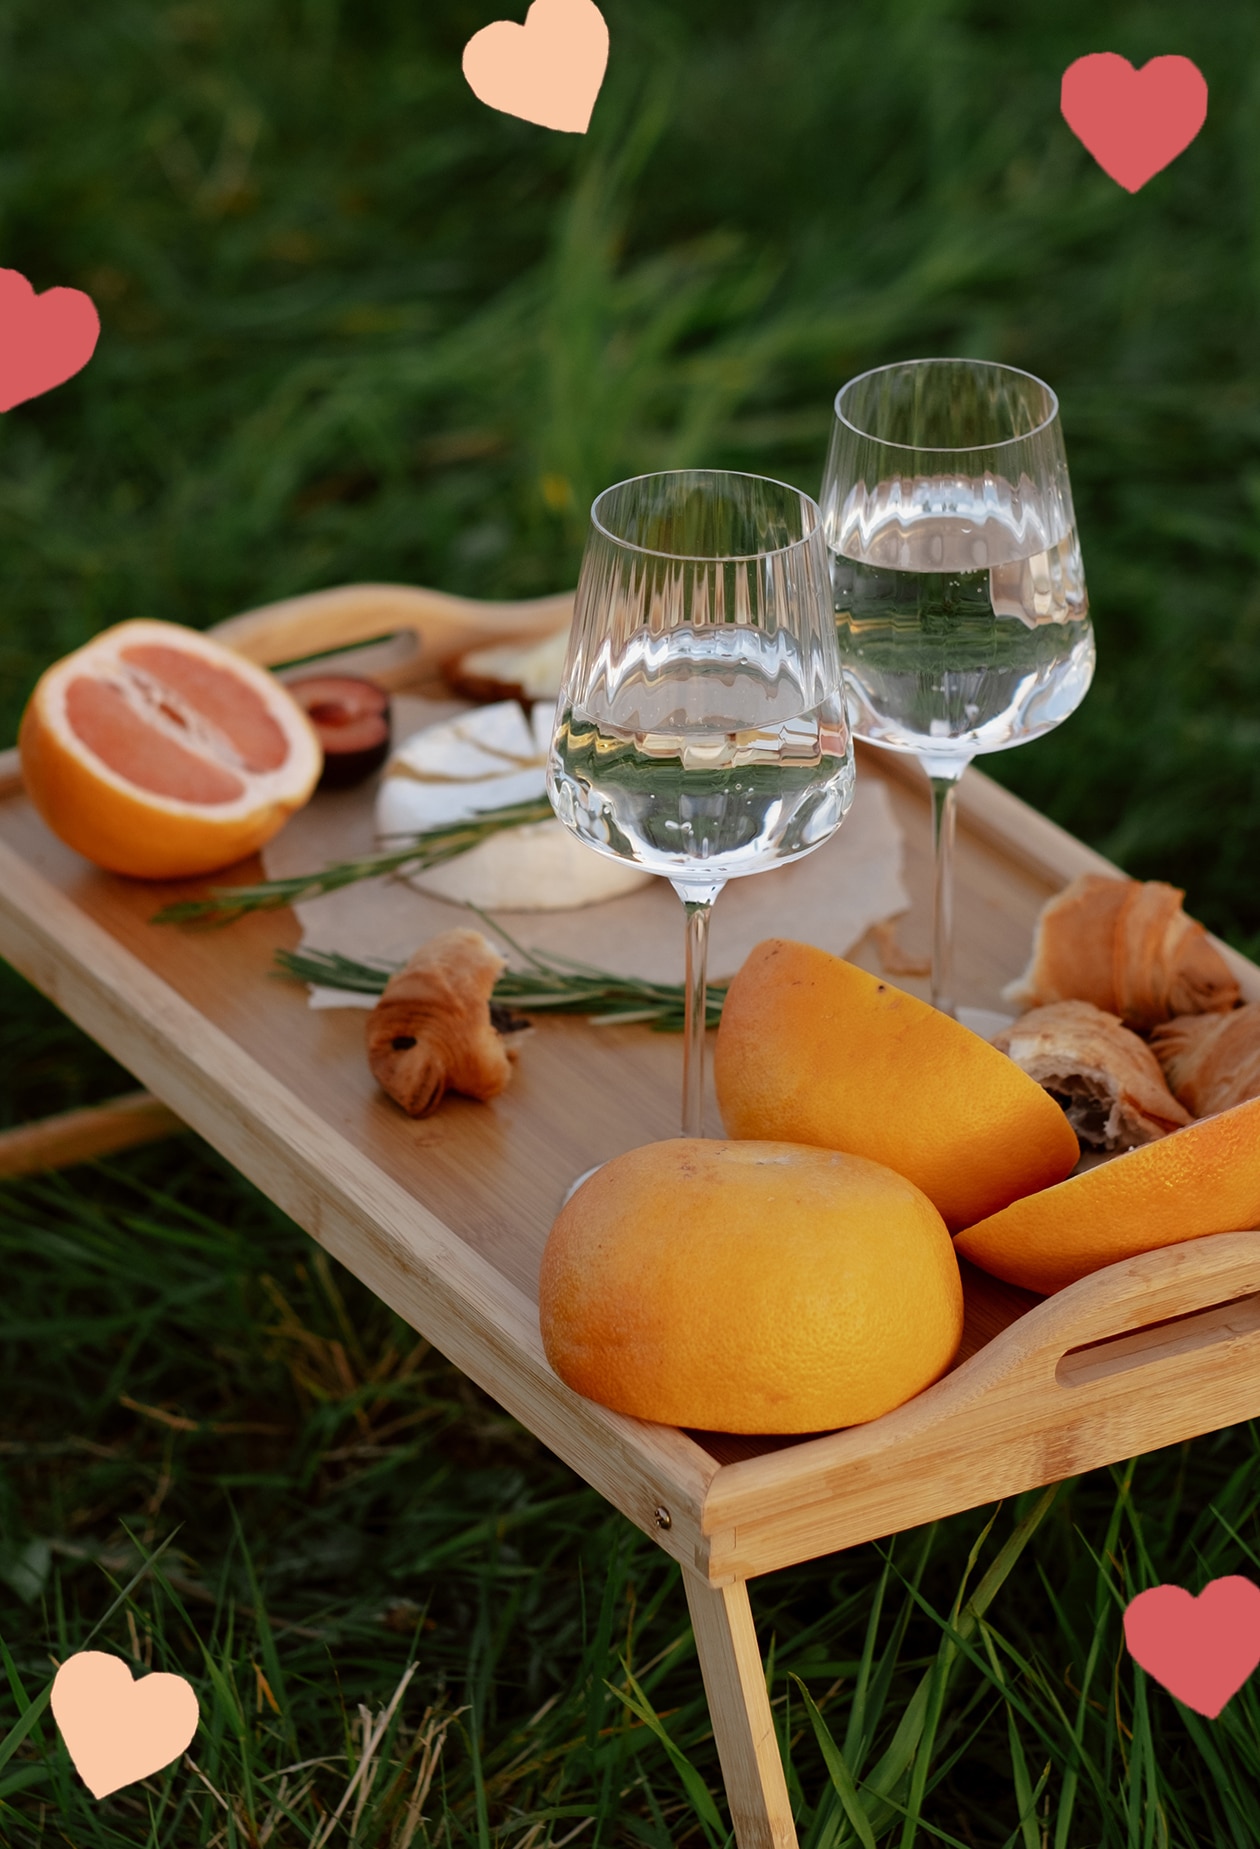 wooden tray table sitting in green grass, with wine glasses, cheese and fruit atop it. scattered hearts decorate the picture.